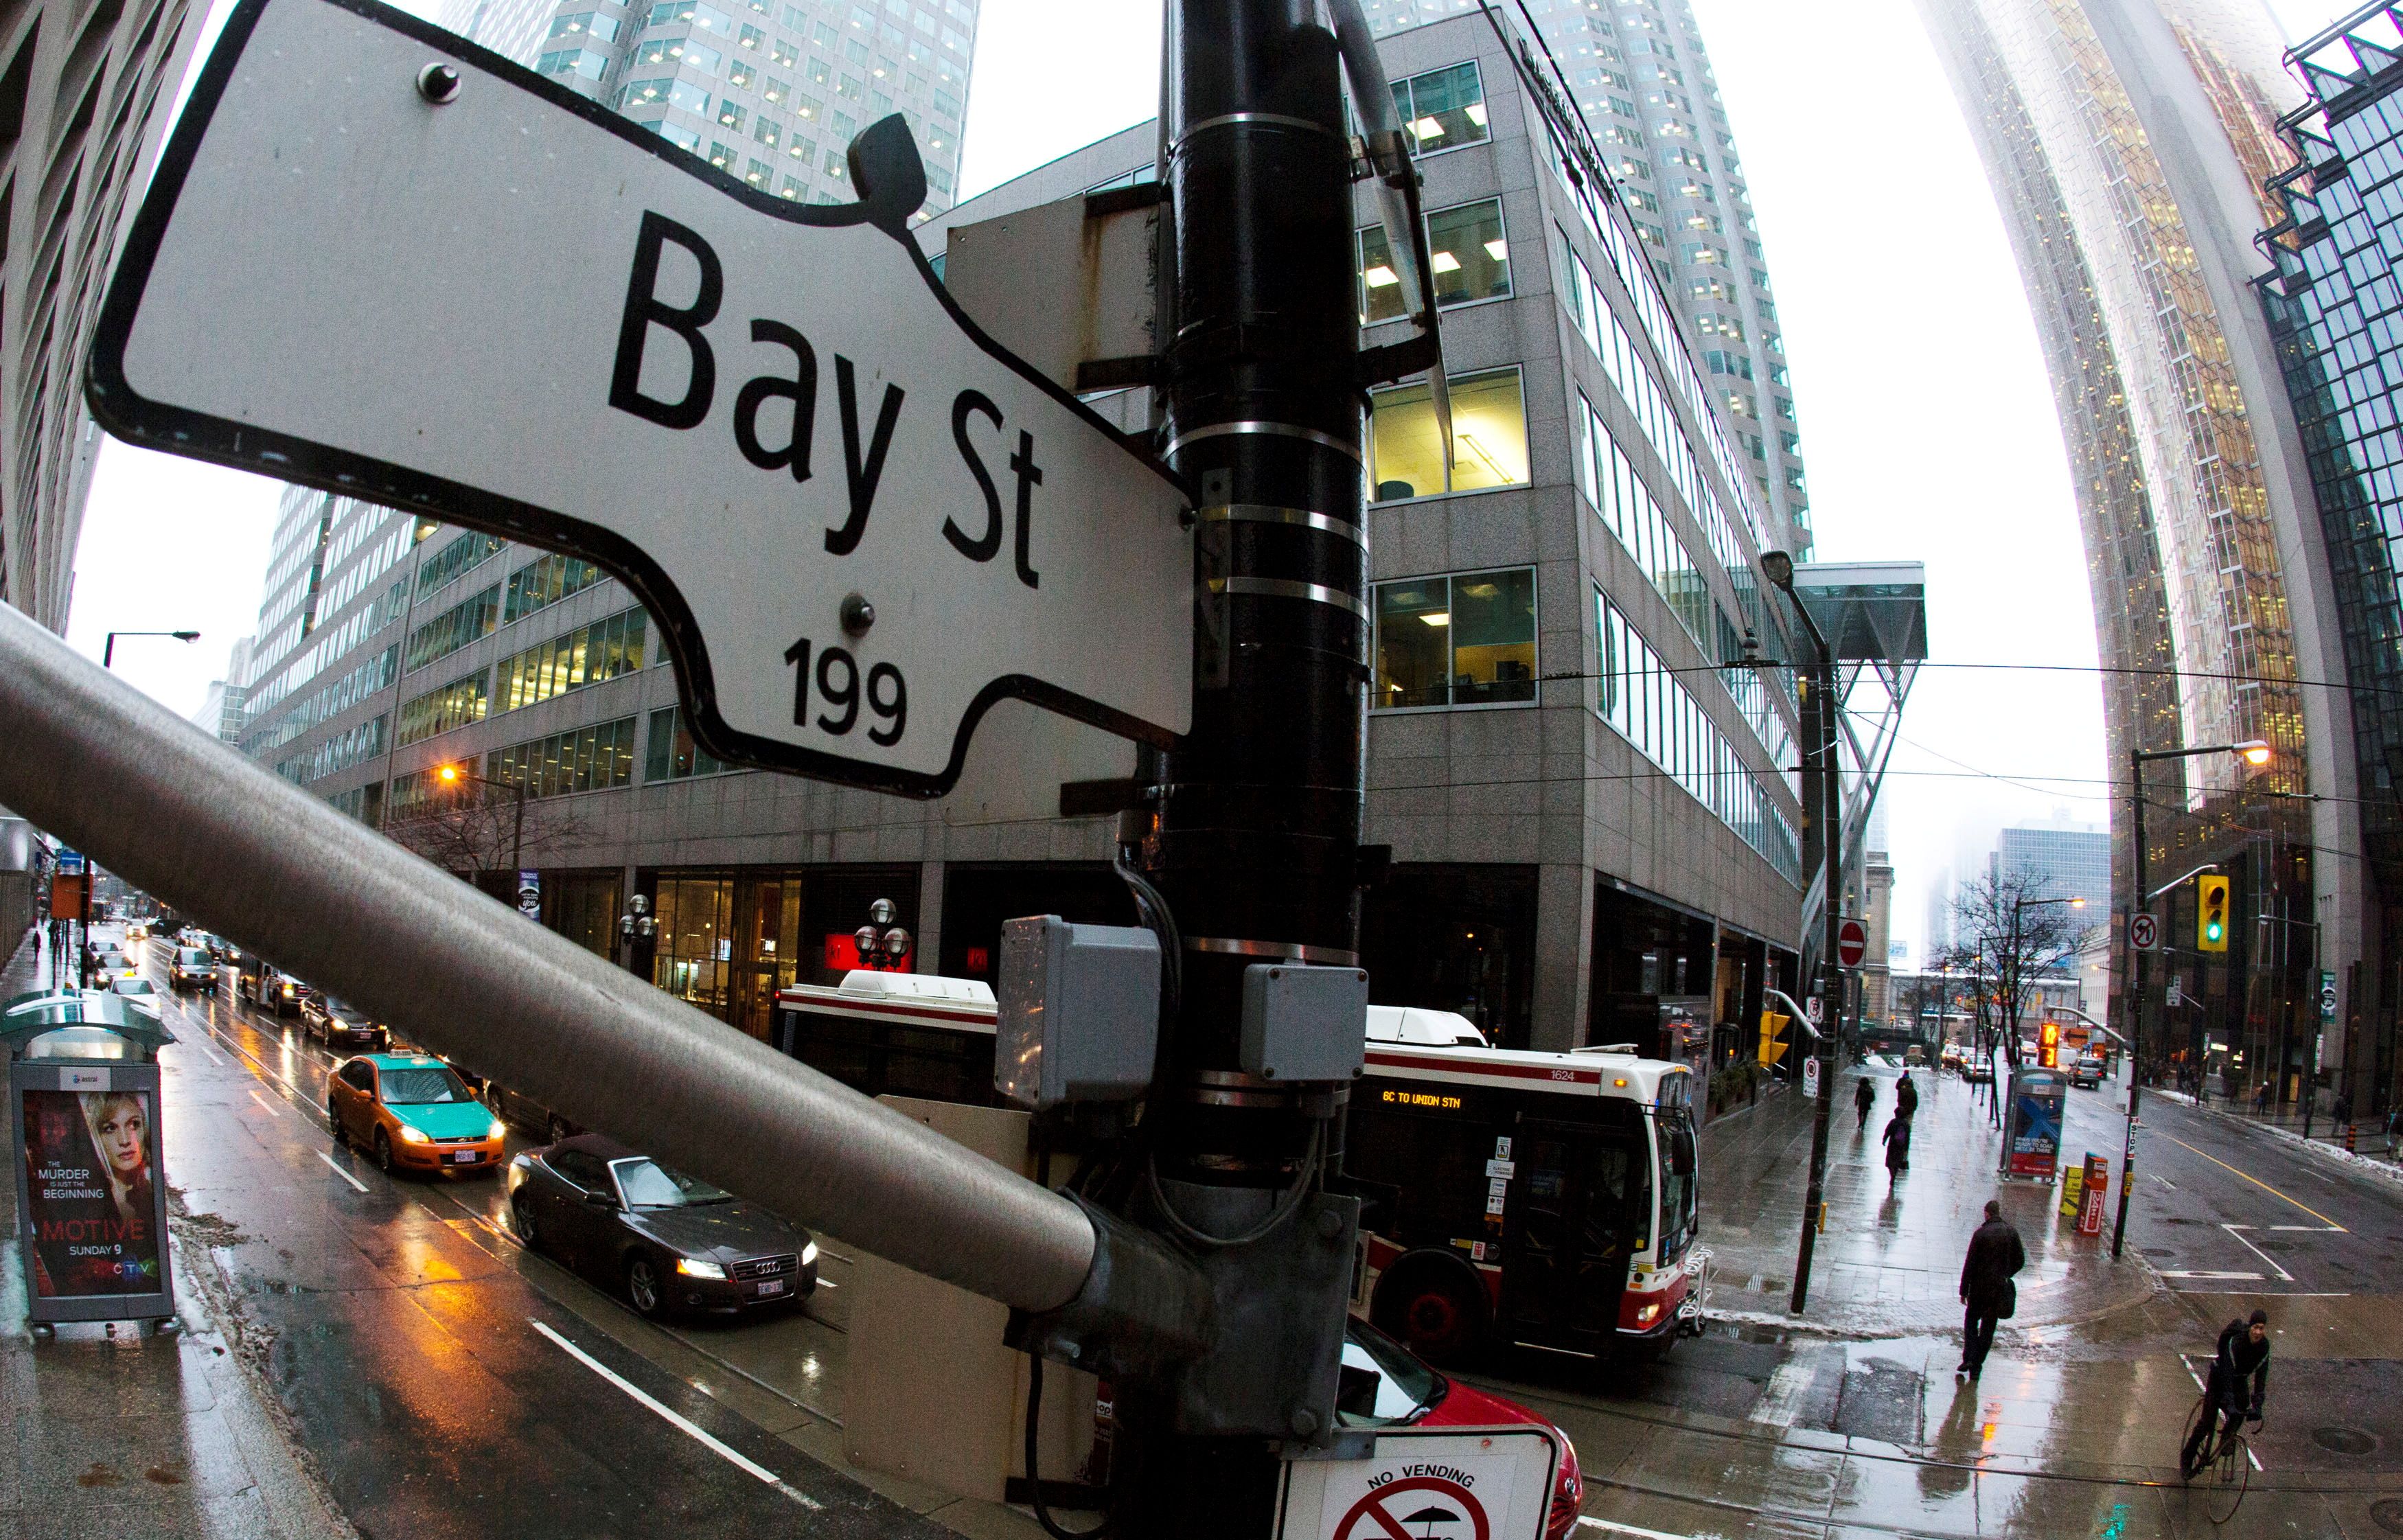 A Bay Street sign, the main street in the financial district is seen in Toronto, January 28, 2013. REUTERS/Mark Blinch/File Photo